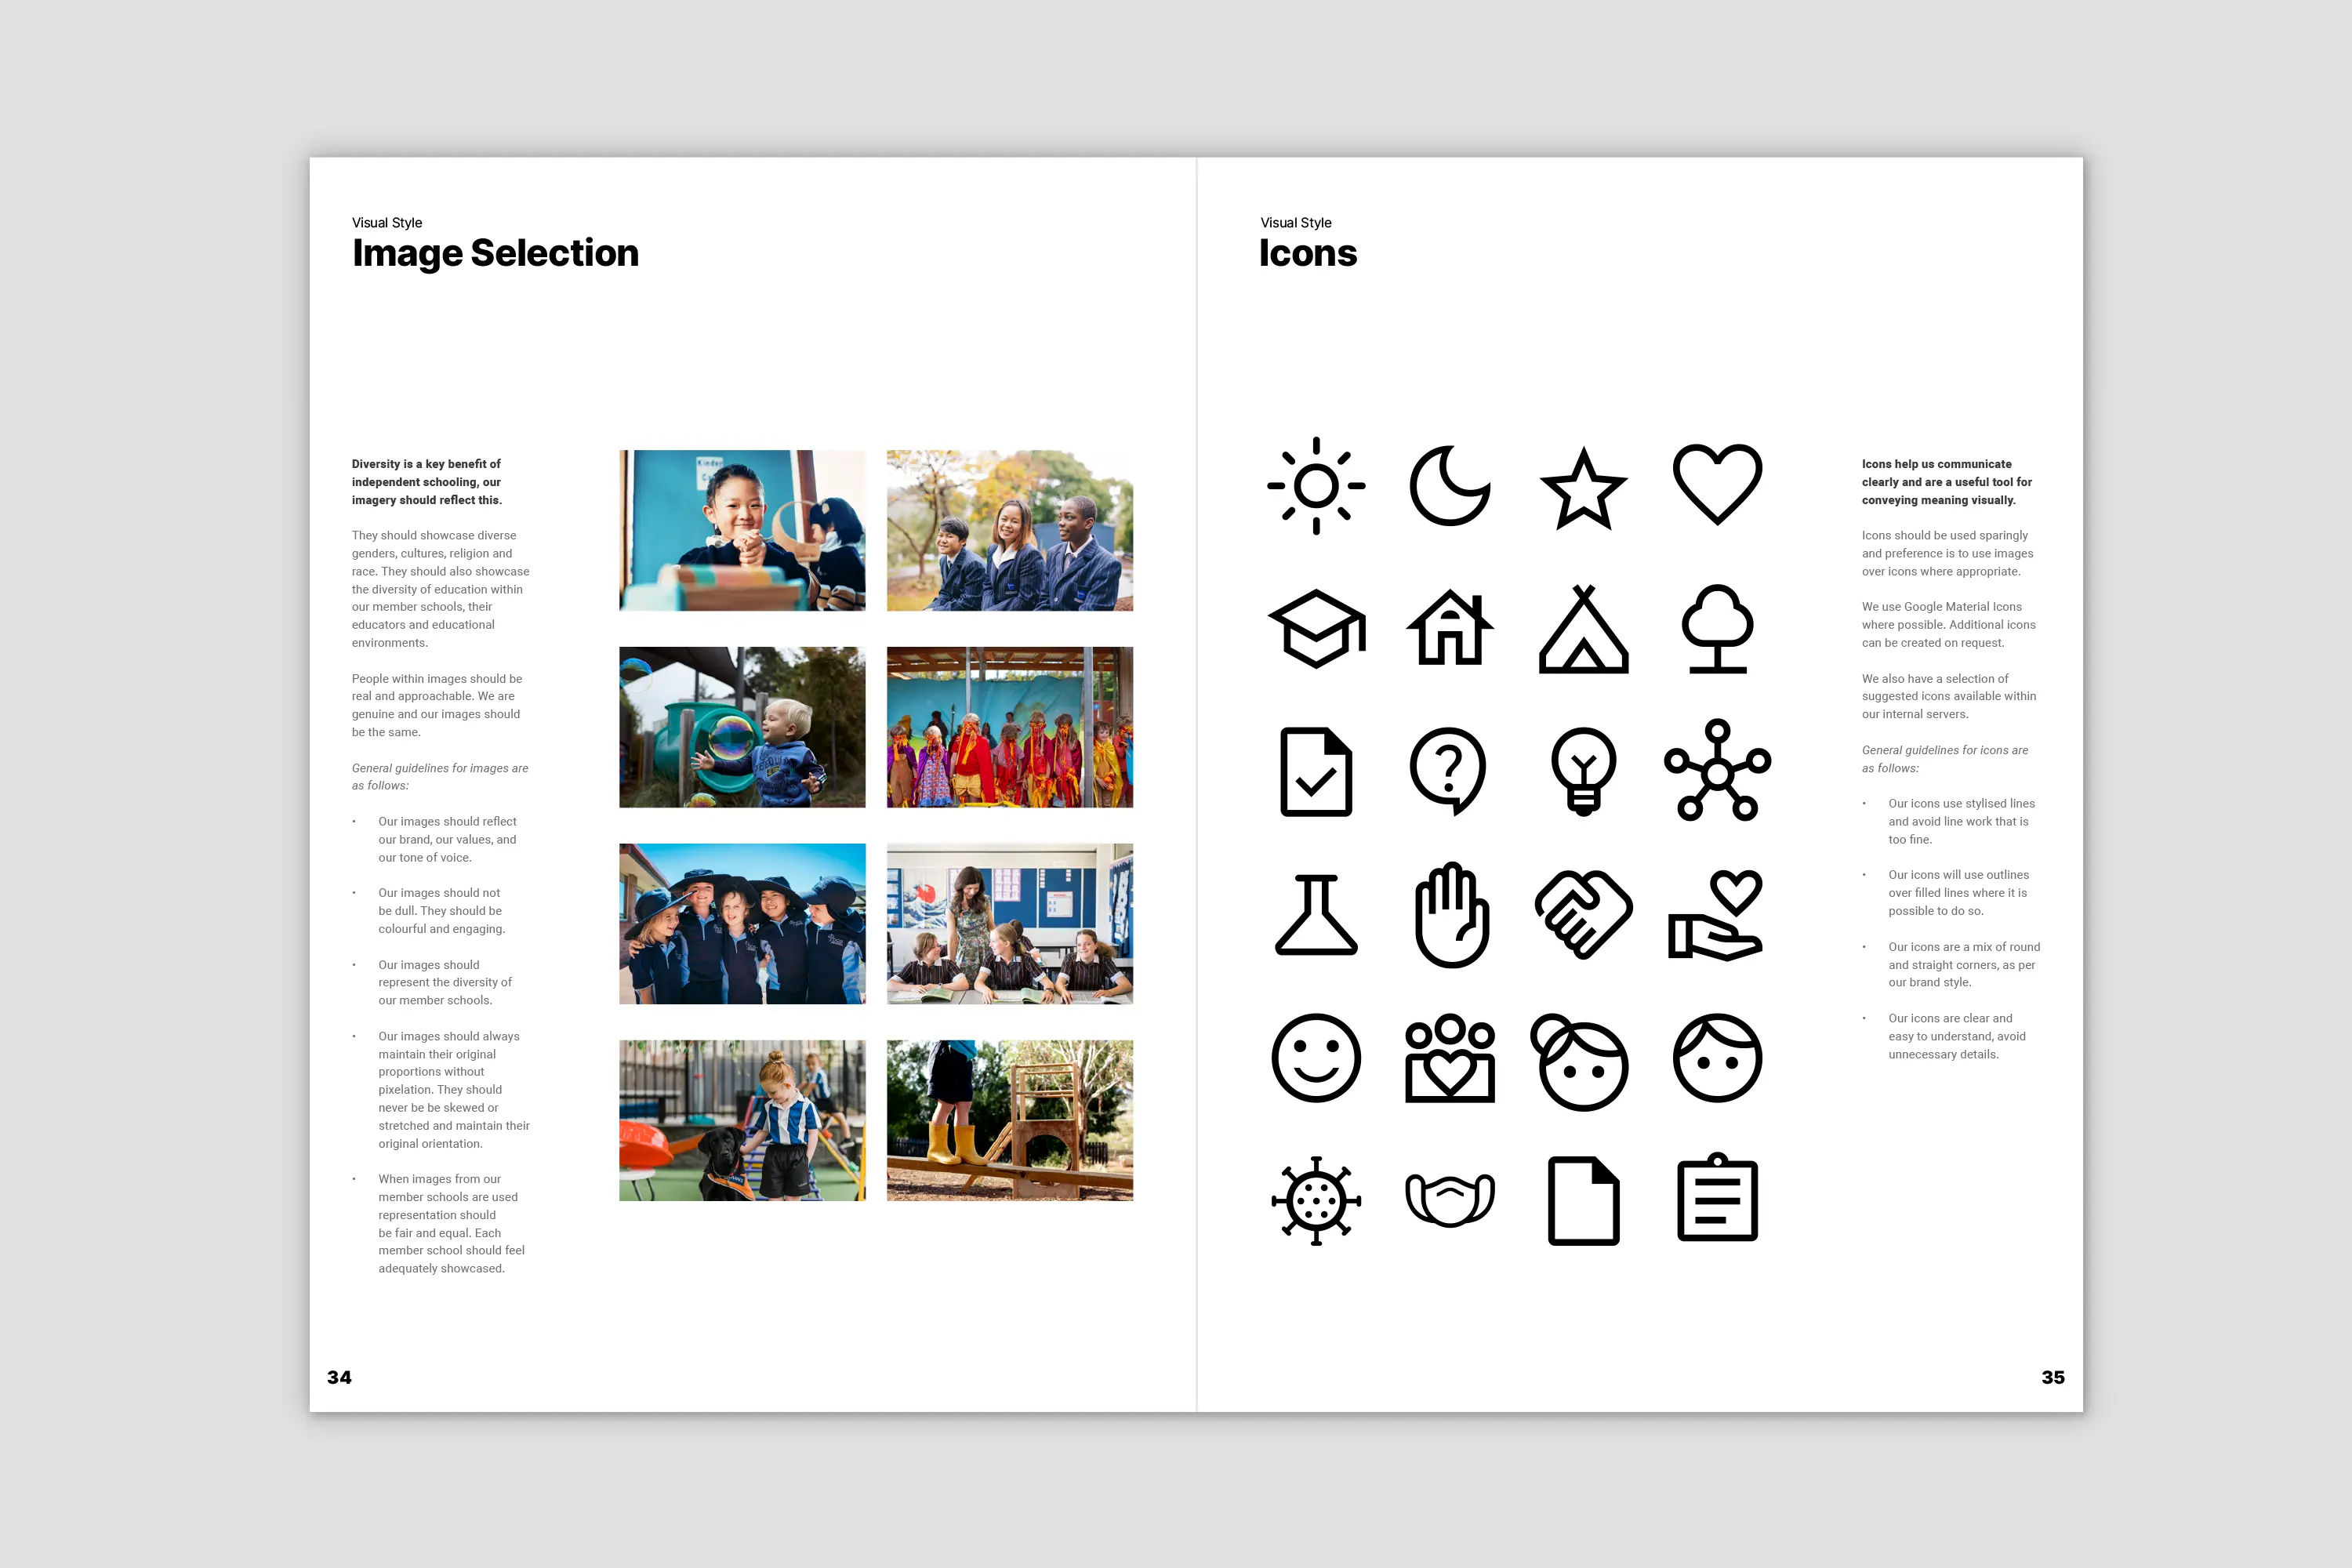 Independent Schools Tasmania brand guidelines - image and icon visual style spread